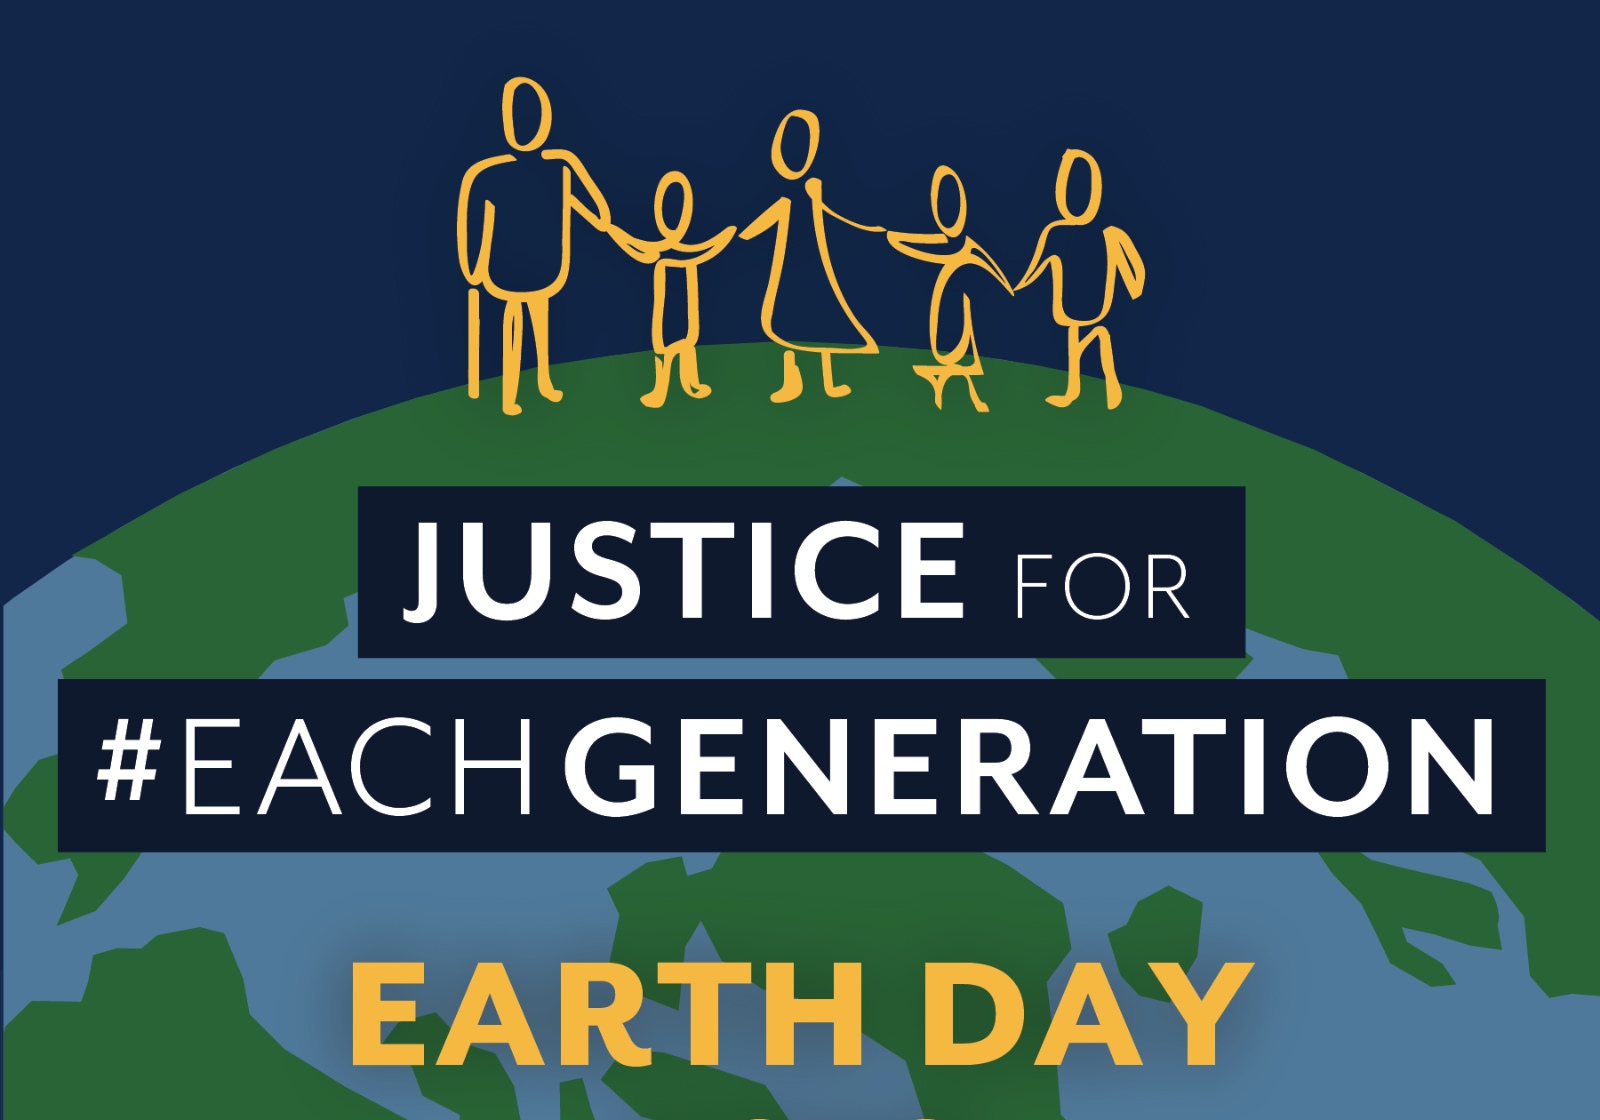 Justice for #EachGeneration Earth Day